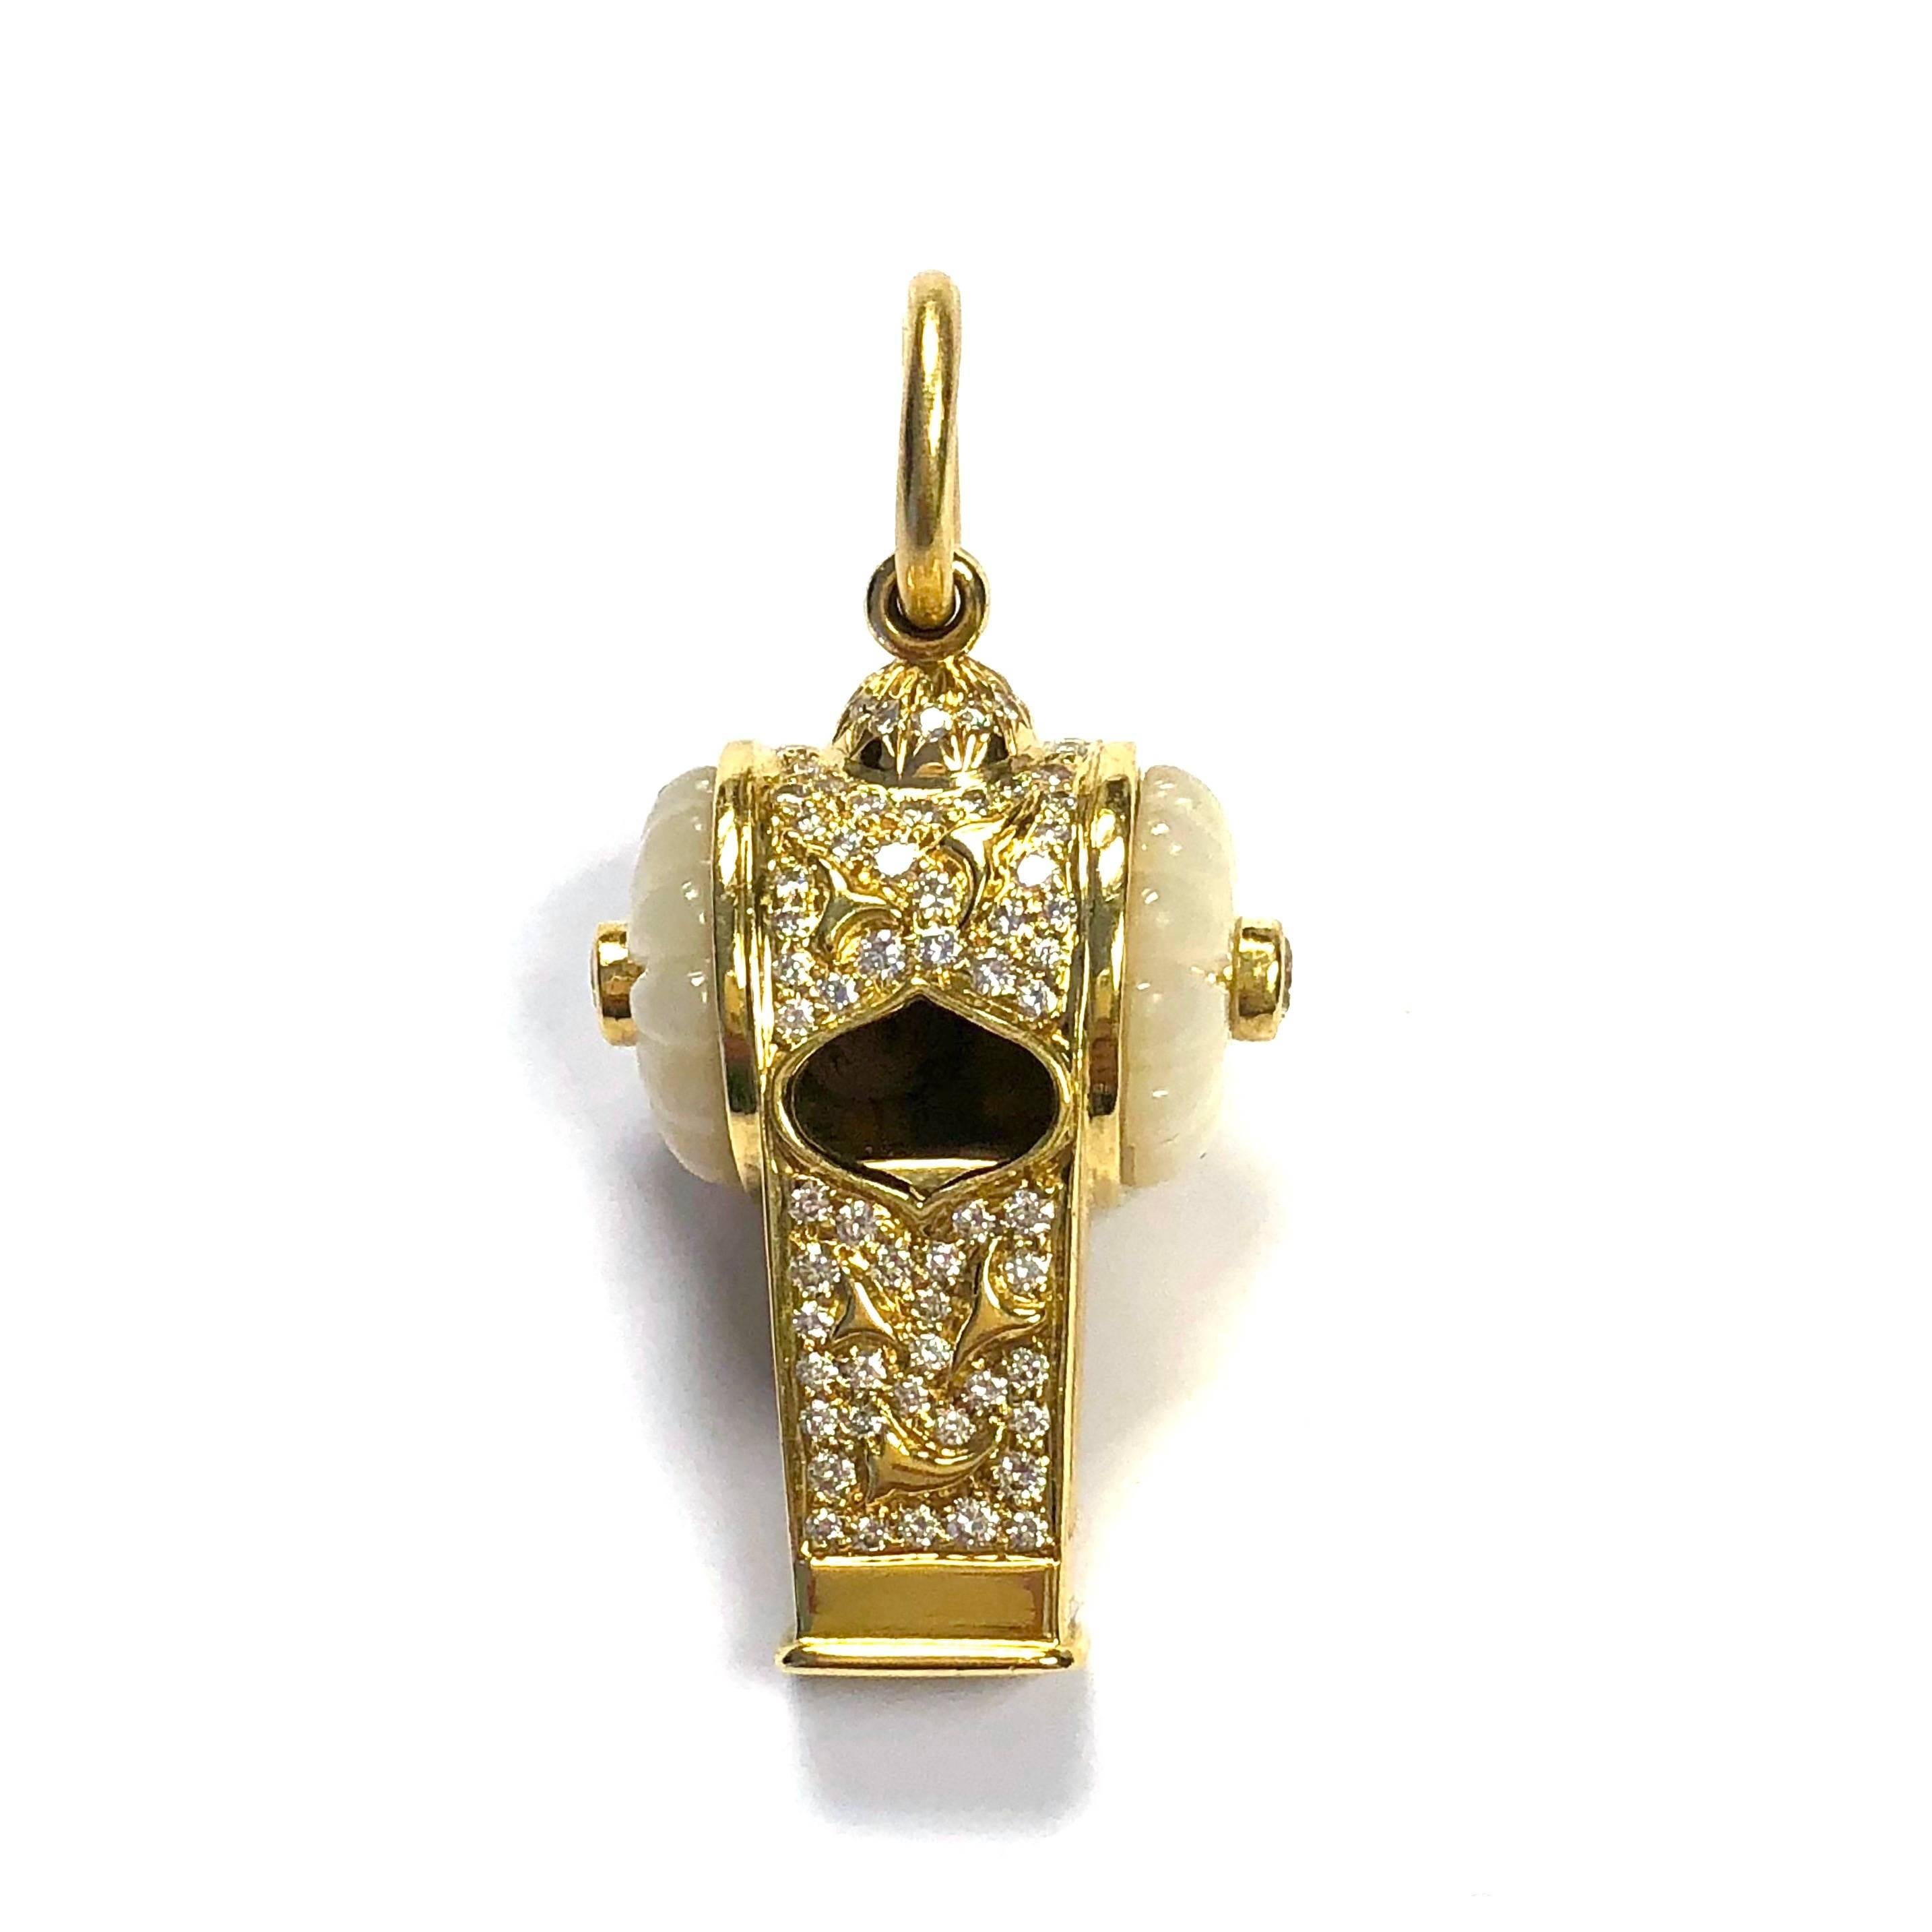 Crafted in 18k gold yellow gold by the famous jewelry house of Harry Winston, this functioning taxi whistle pendant features carved mother-of-pearl sides embellished with bezel set round brilliant cut diamonds  and an elaborate design in gold and